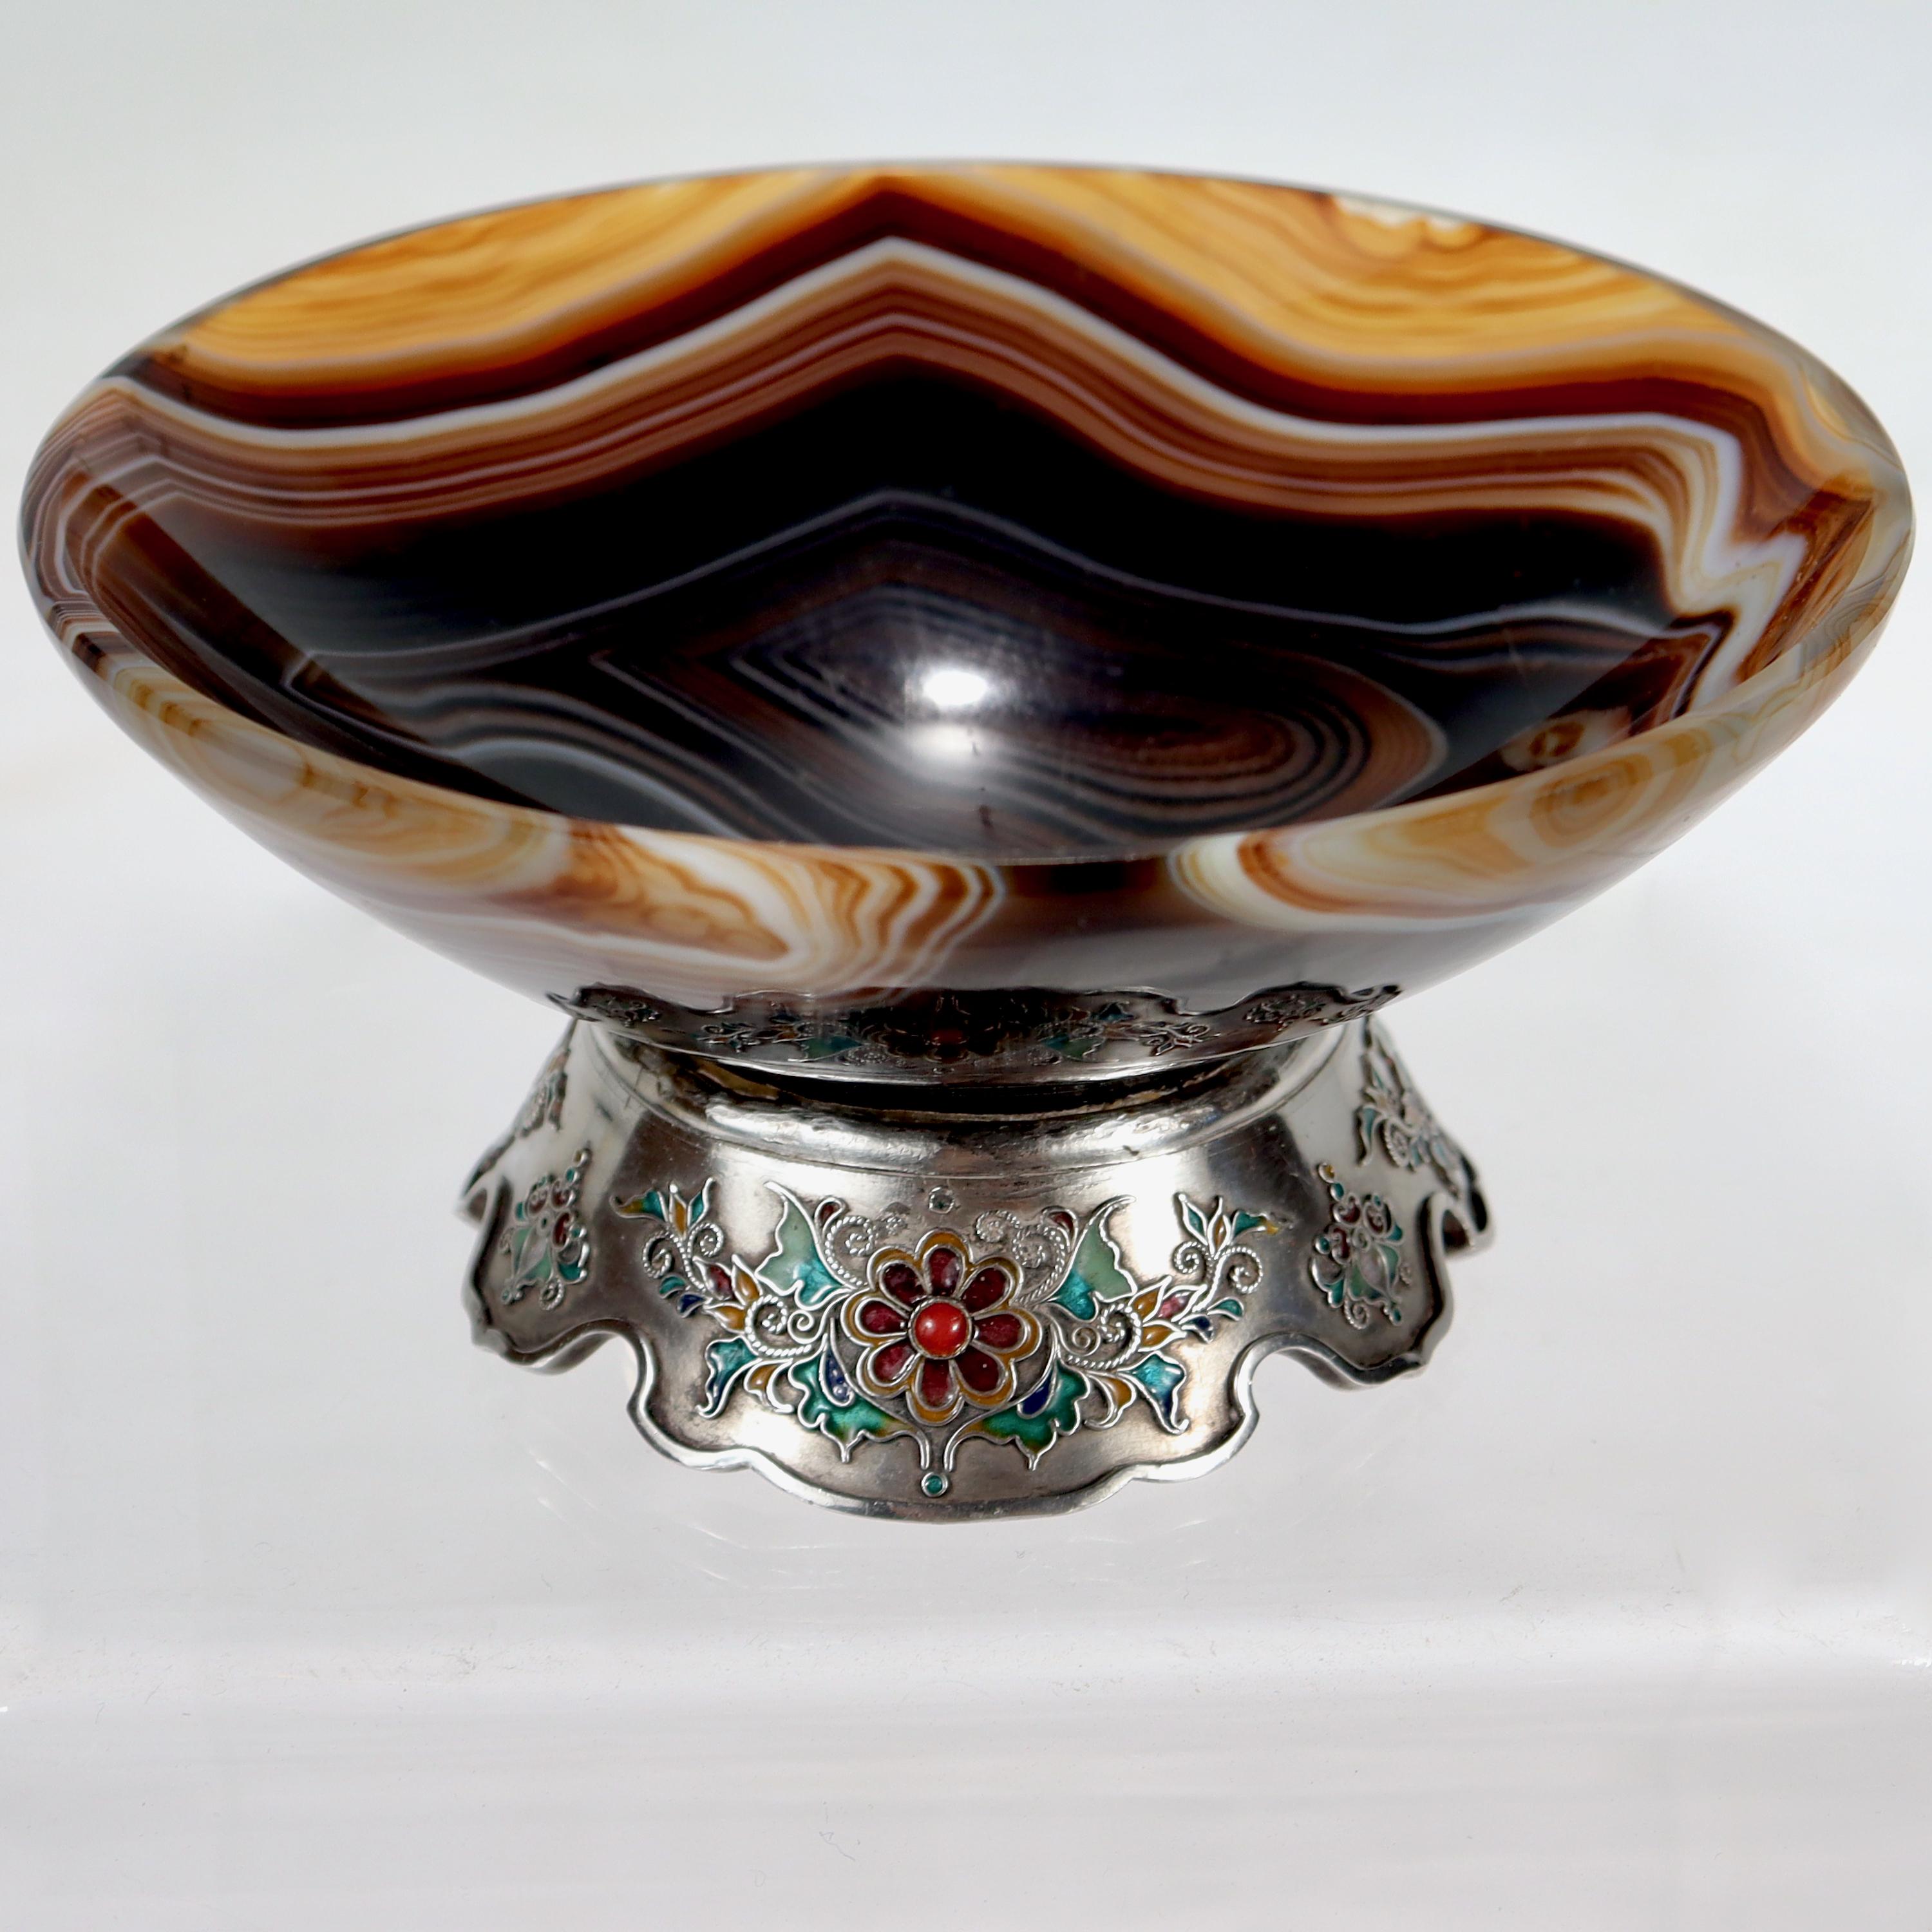 A fine silver, enamel, & agate bowl.

With a carved agate bowl mounted on a silver & enamel base.

We're unsure about the bowl's origin, although we have a strong inclination to think that it's Austrian.

The base has intricate embossed flowers in